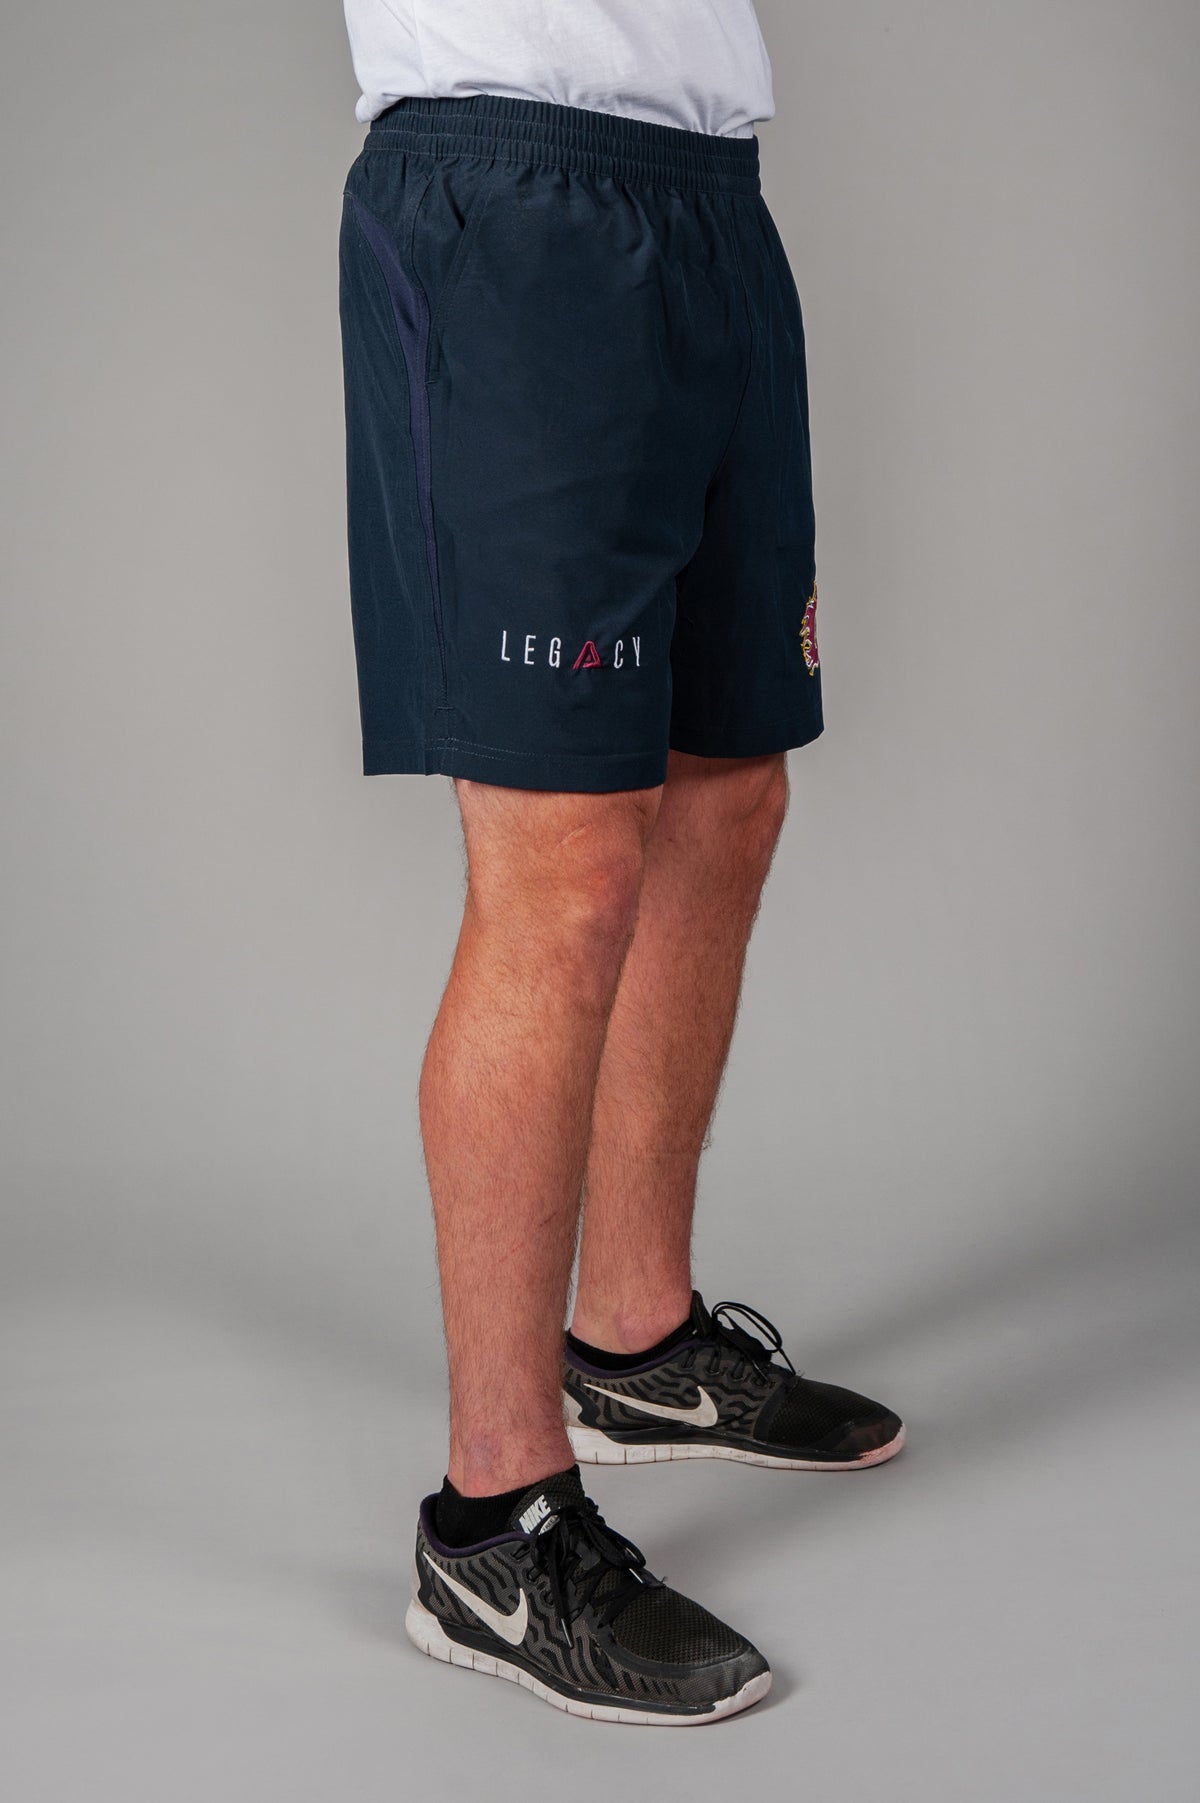 Flames Team Issued Shorts